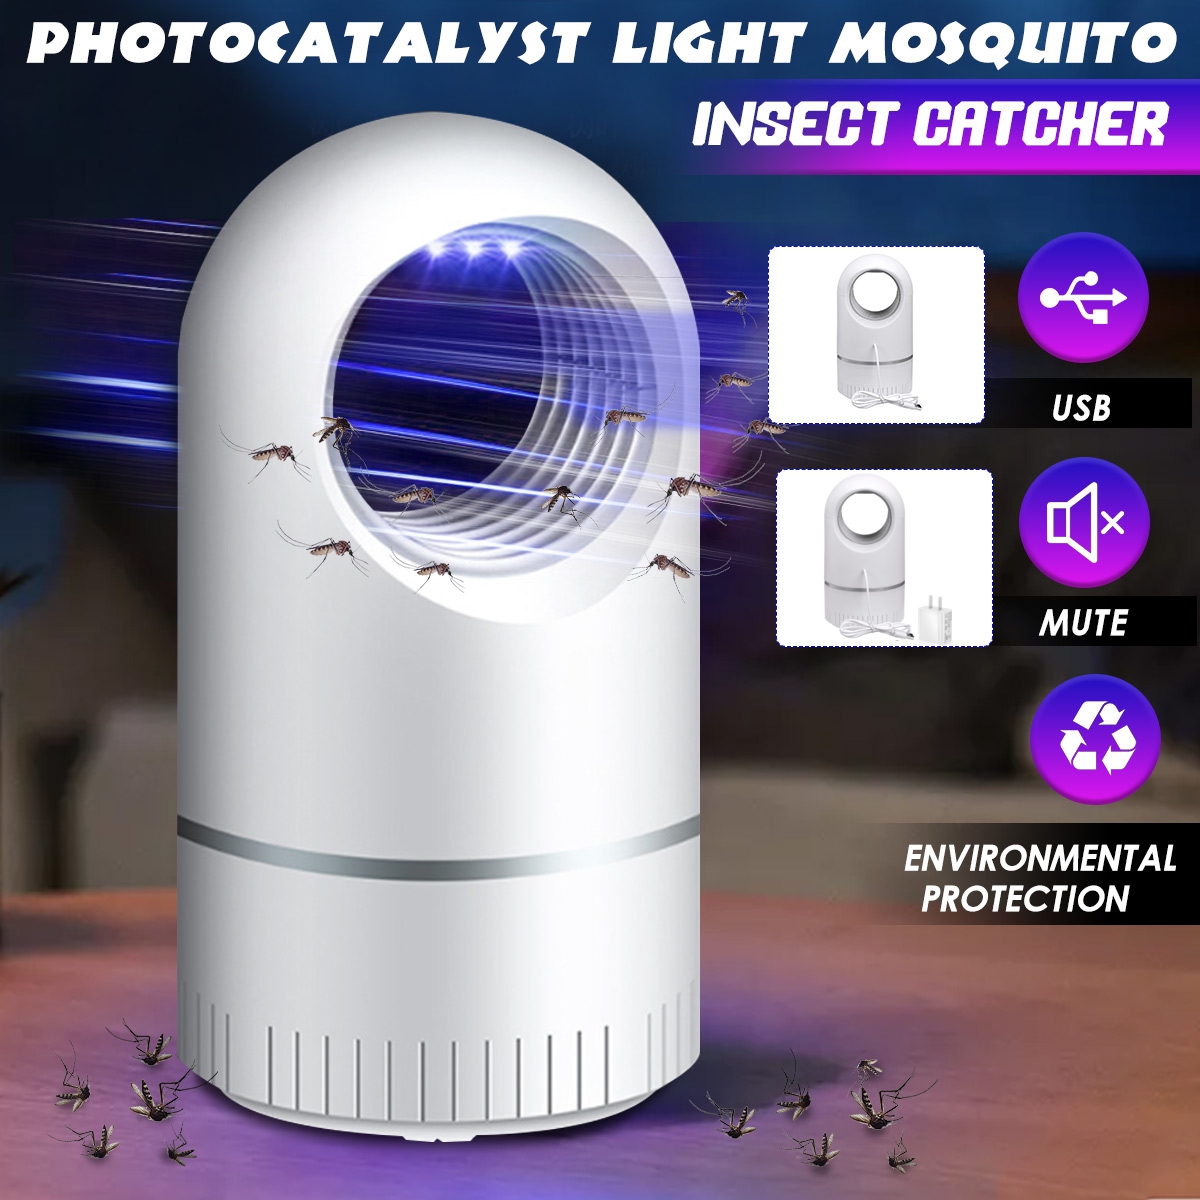 Photocatalyst-360deg-LED-Mosquito-Trapping-Catcher-Lamp-Insect-Trap-Light-USB-Mosquito-Lamp-Fy-Repel-1516538-2